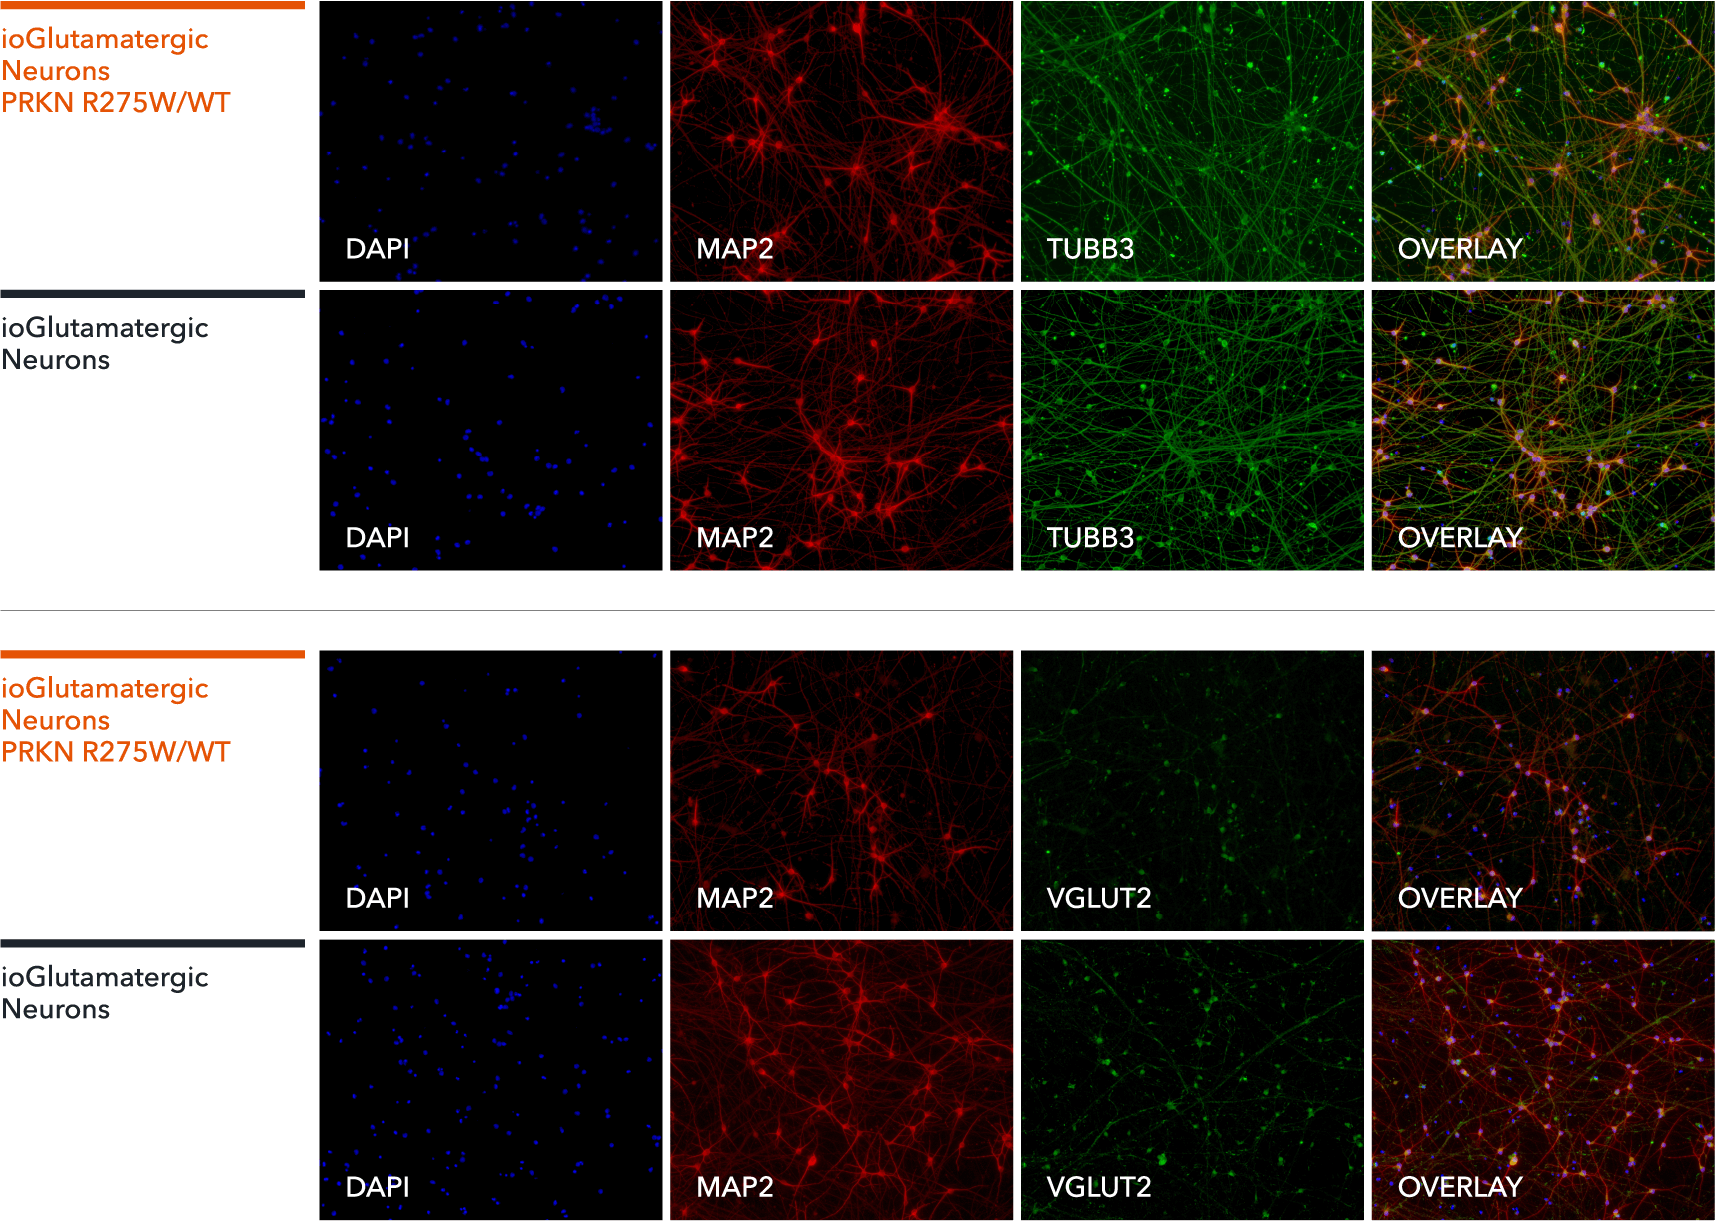 ICC showing glutamatergic neurons with heterozygous R275W mutation in the PRKN gene expressing pan-neuronal markers in an equivalent manner to an isogenic control